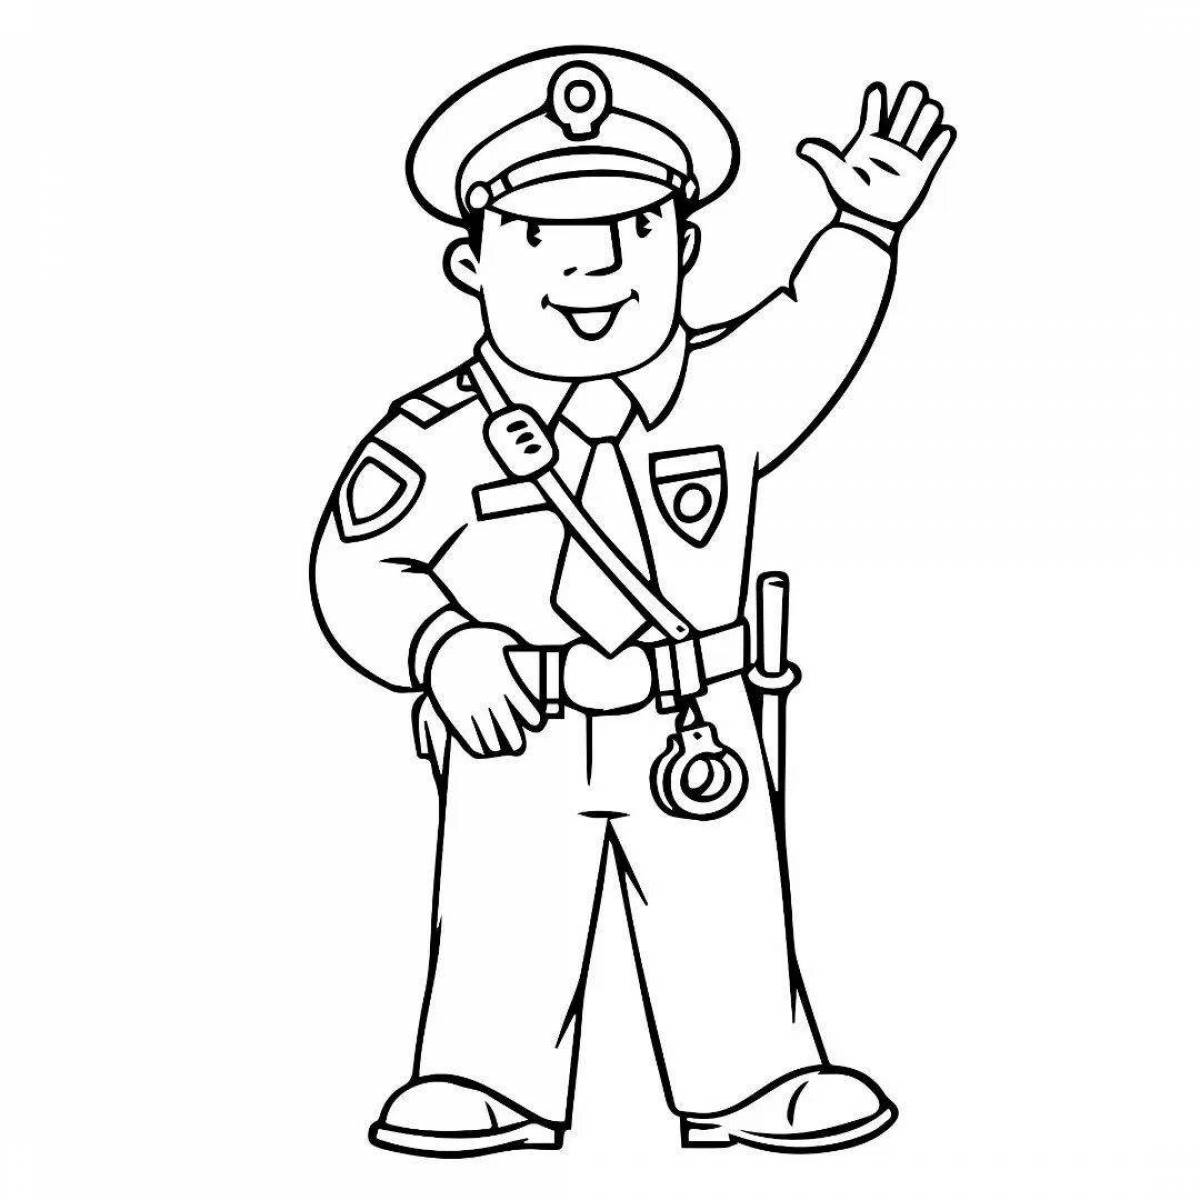 Coloring page playful policeman